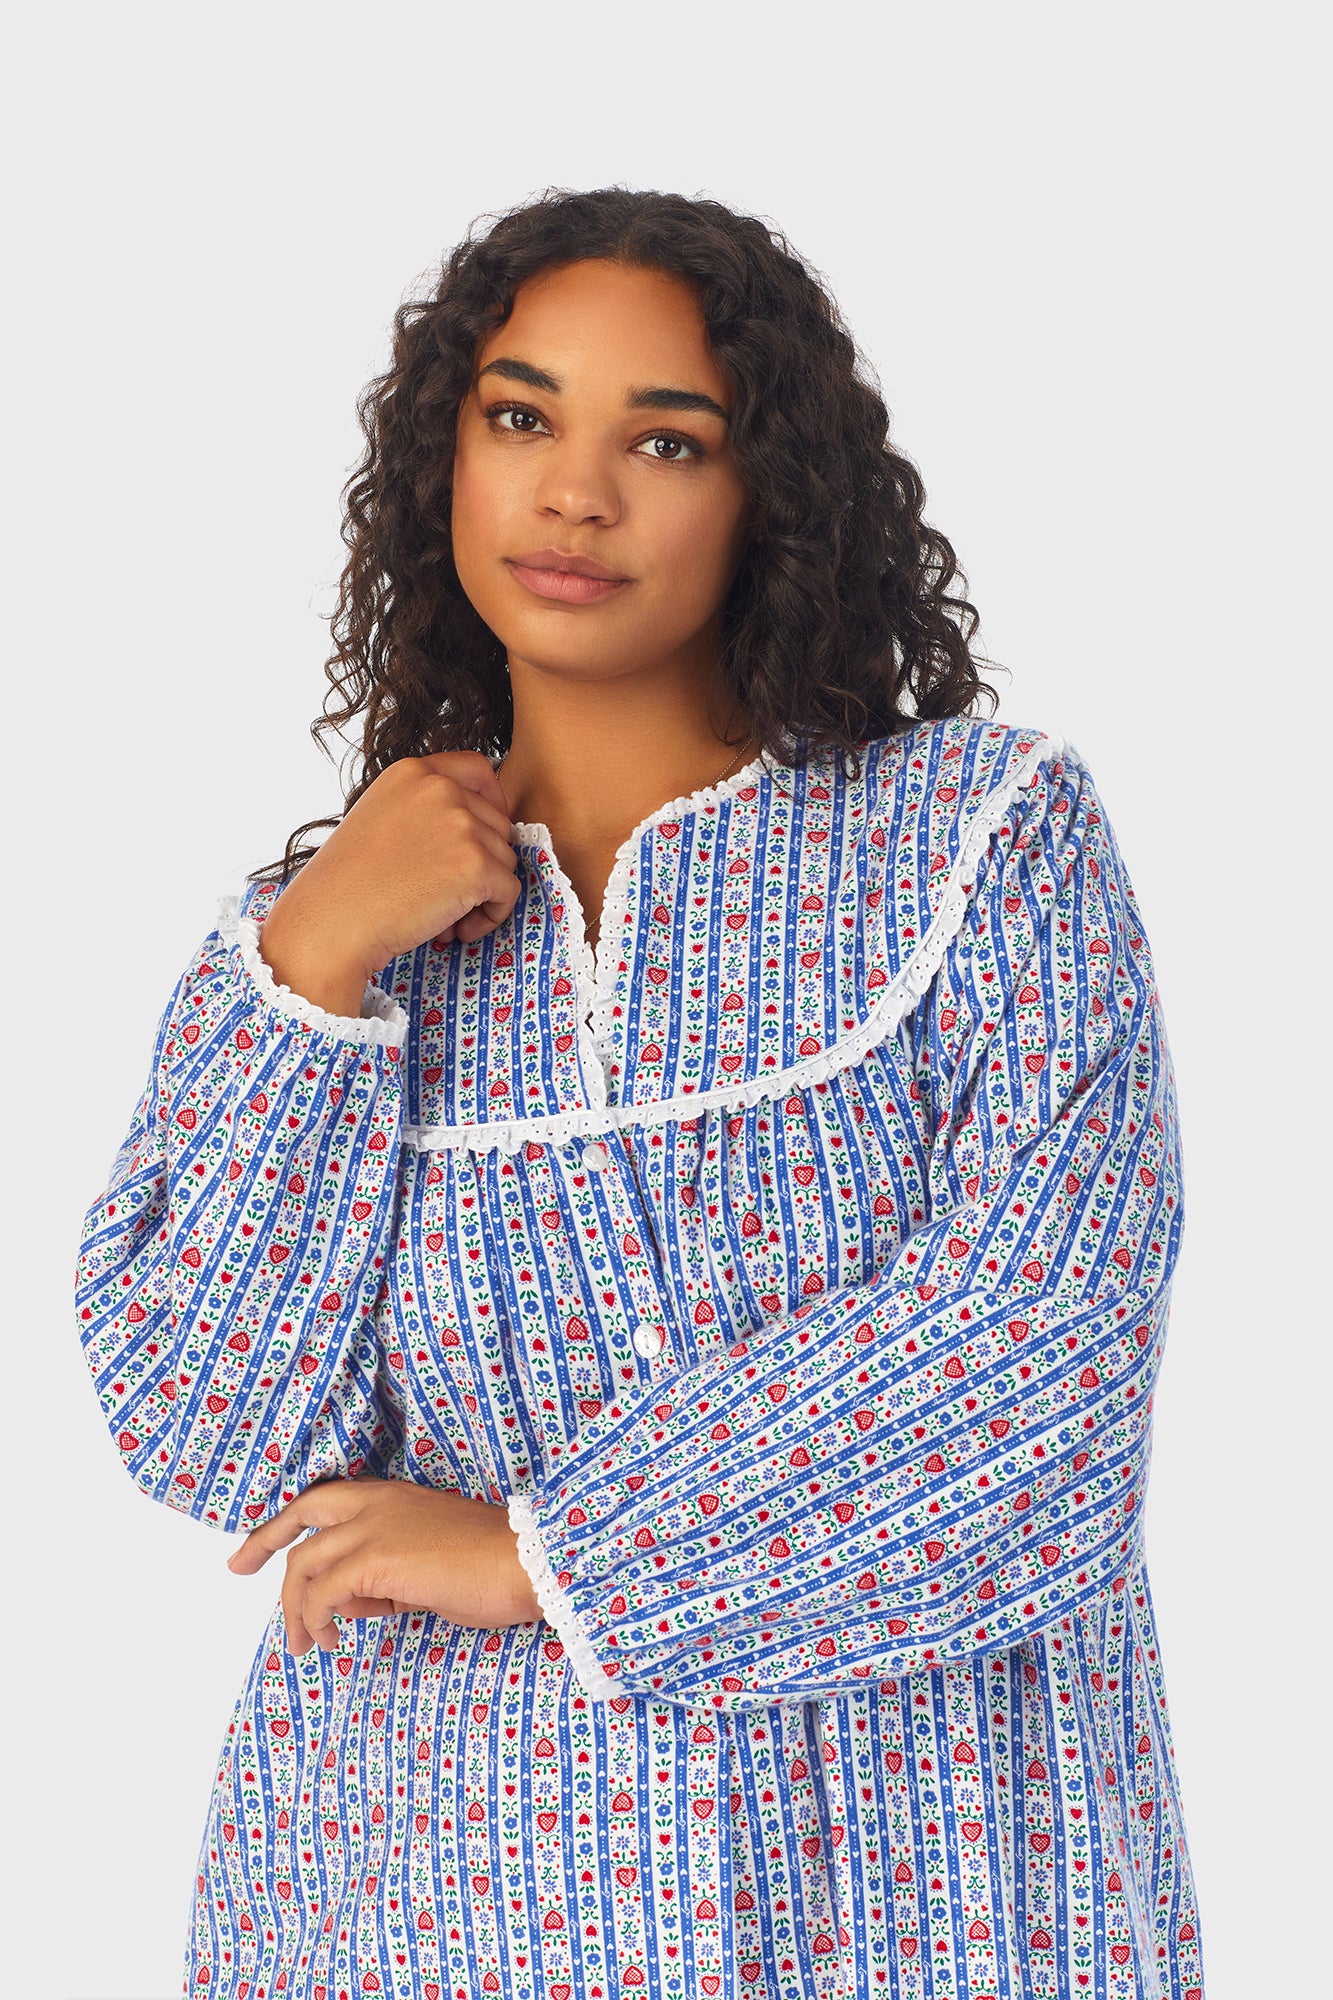  A lady wearing a blue long sleeve flannel nightgown plus with tyrolean stripe pattern.